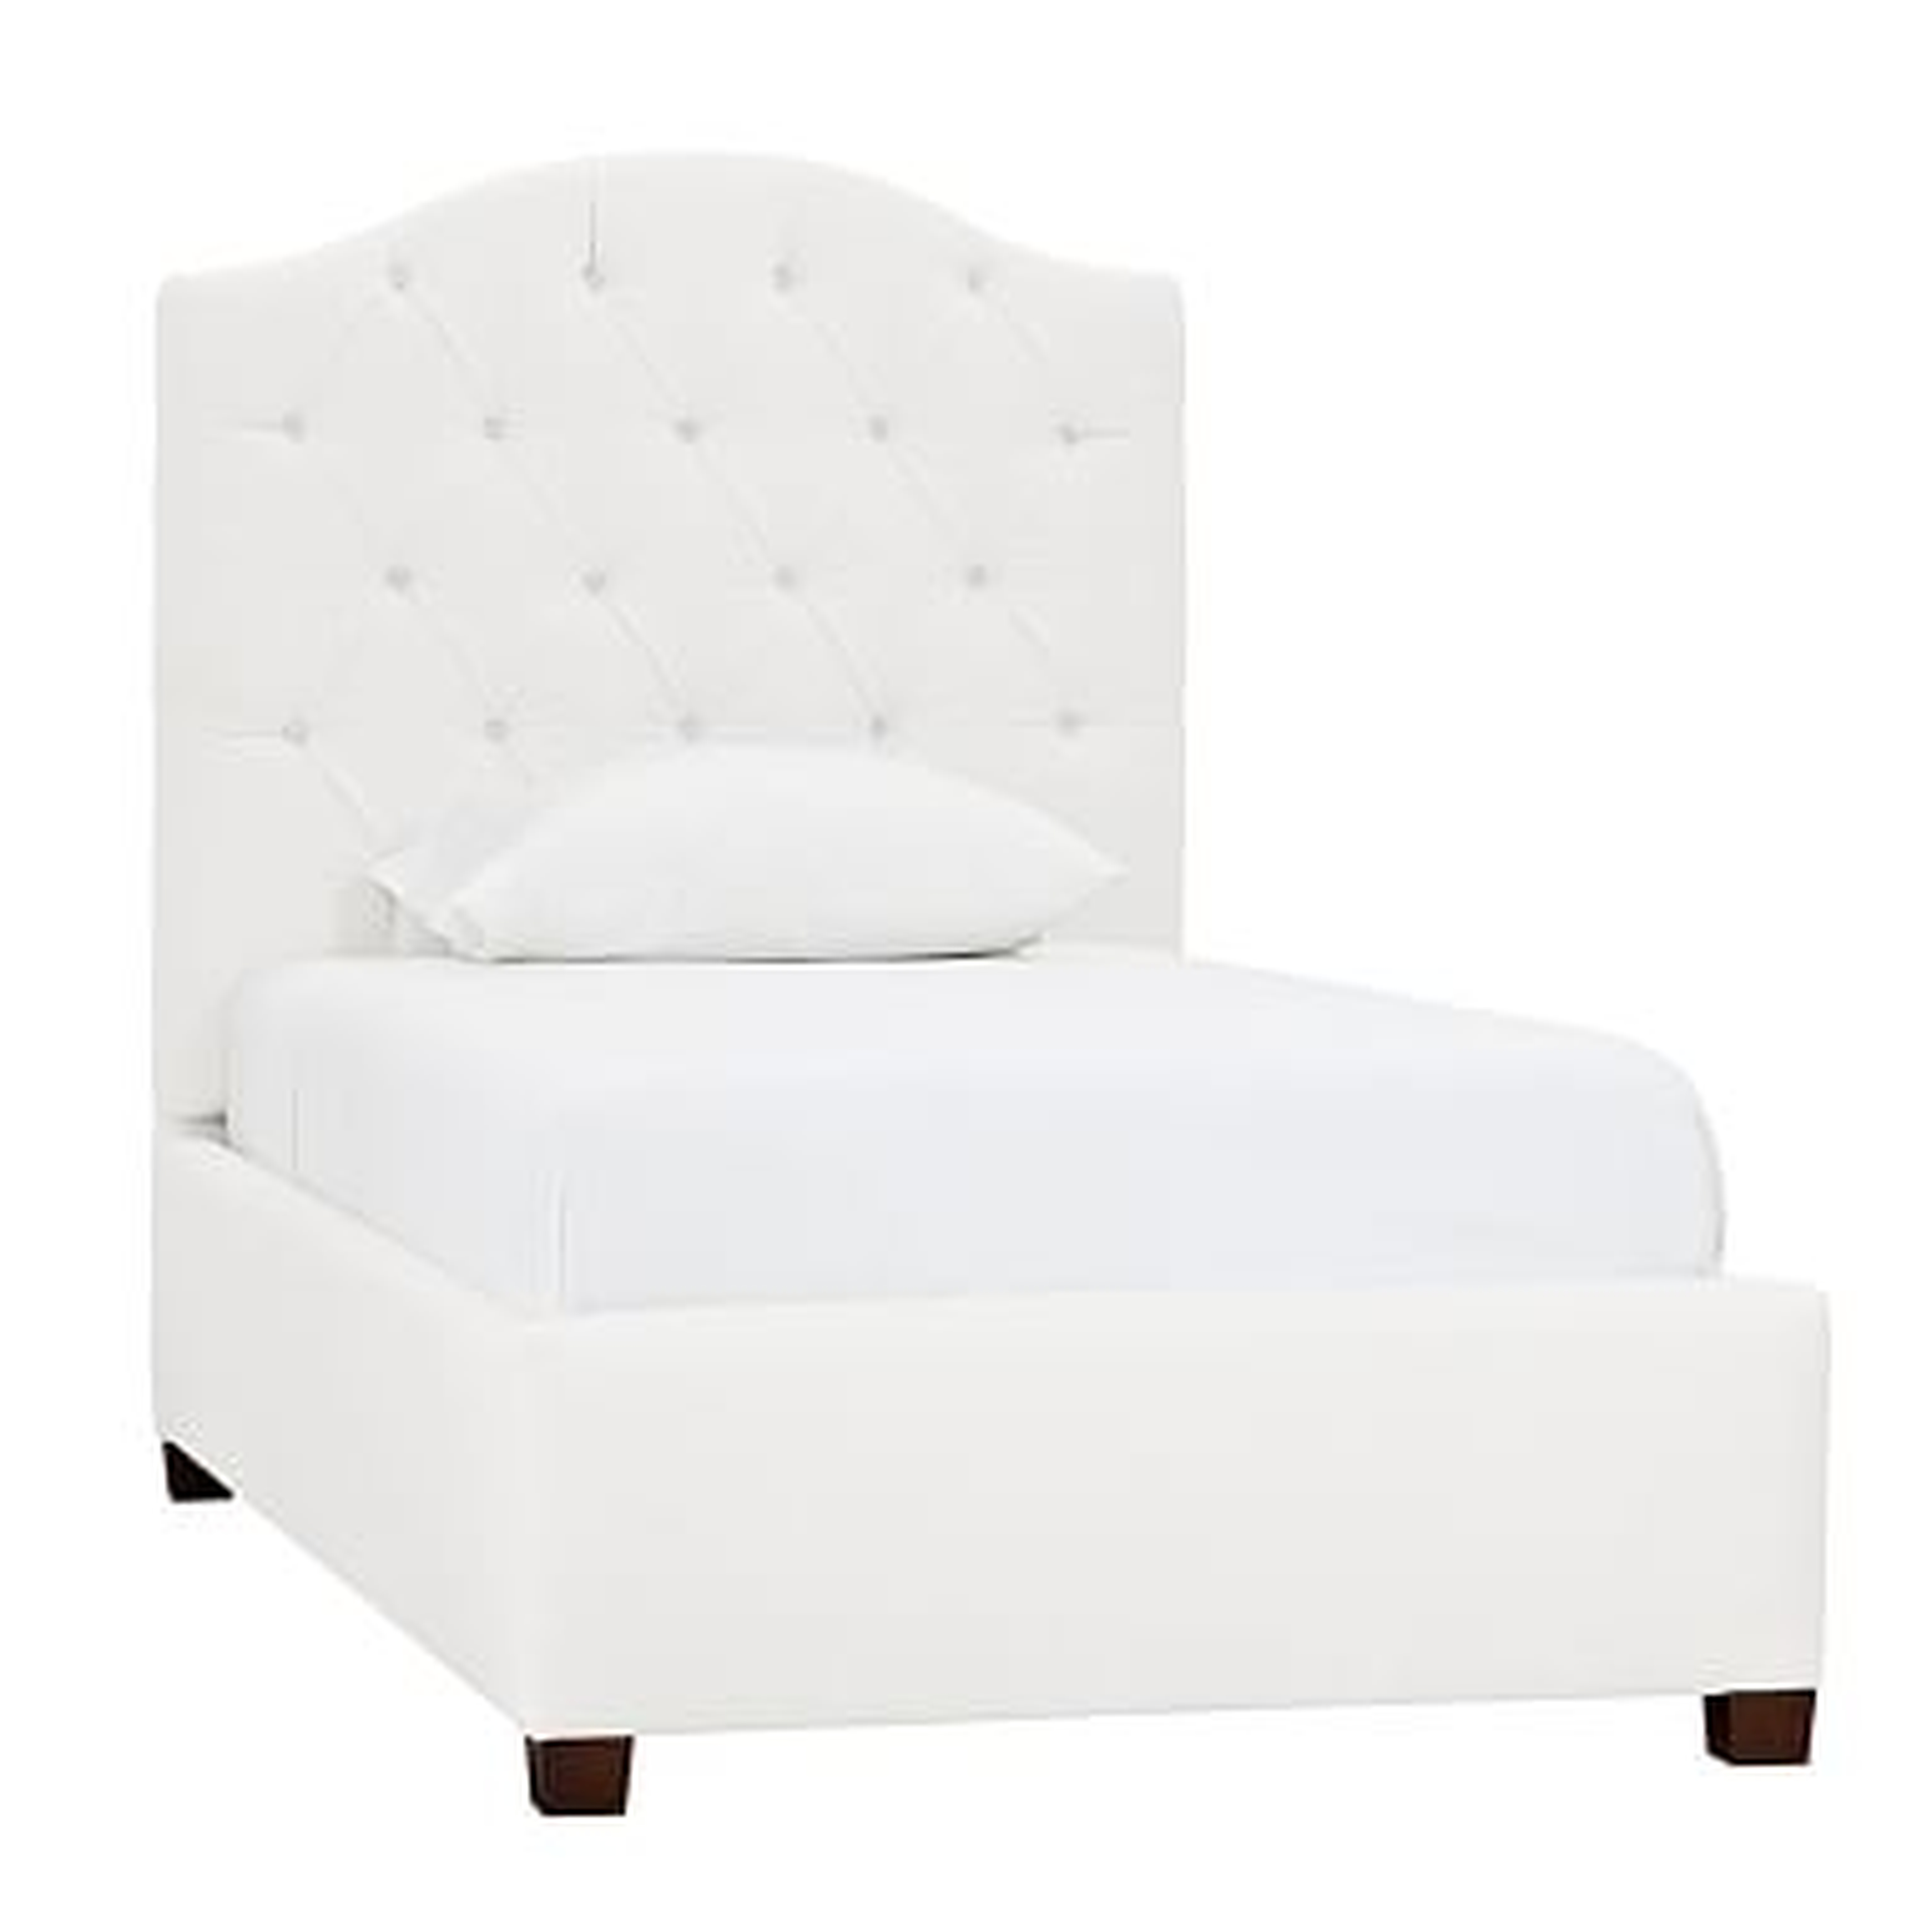 Eliza Tufted Complete Bed, Twin,Washed Linen Cotton, White - Pottery Barn Teen